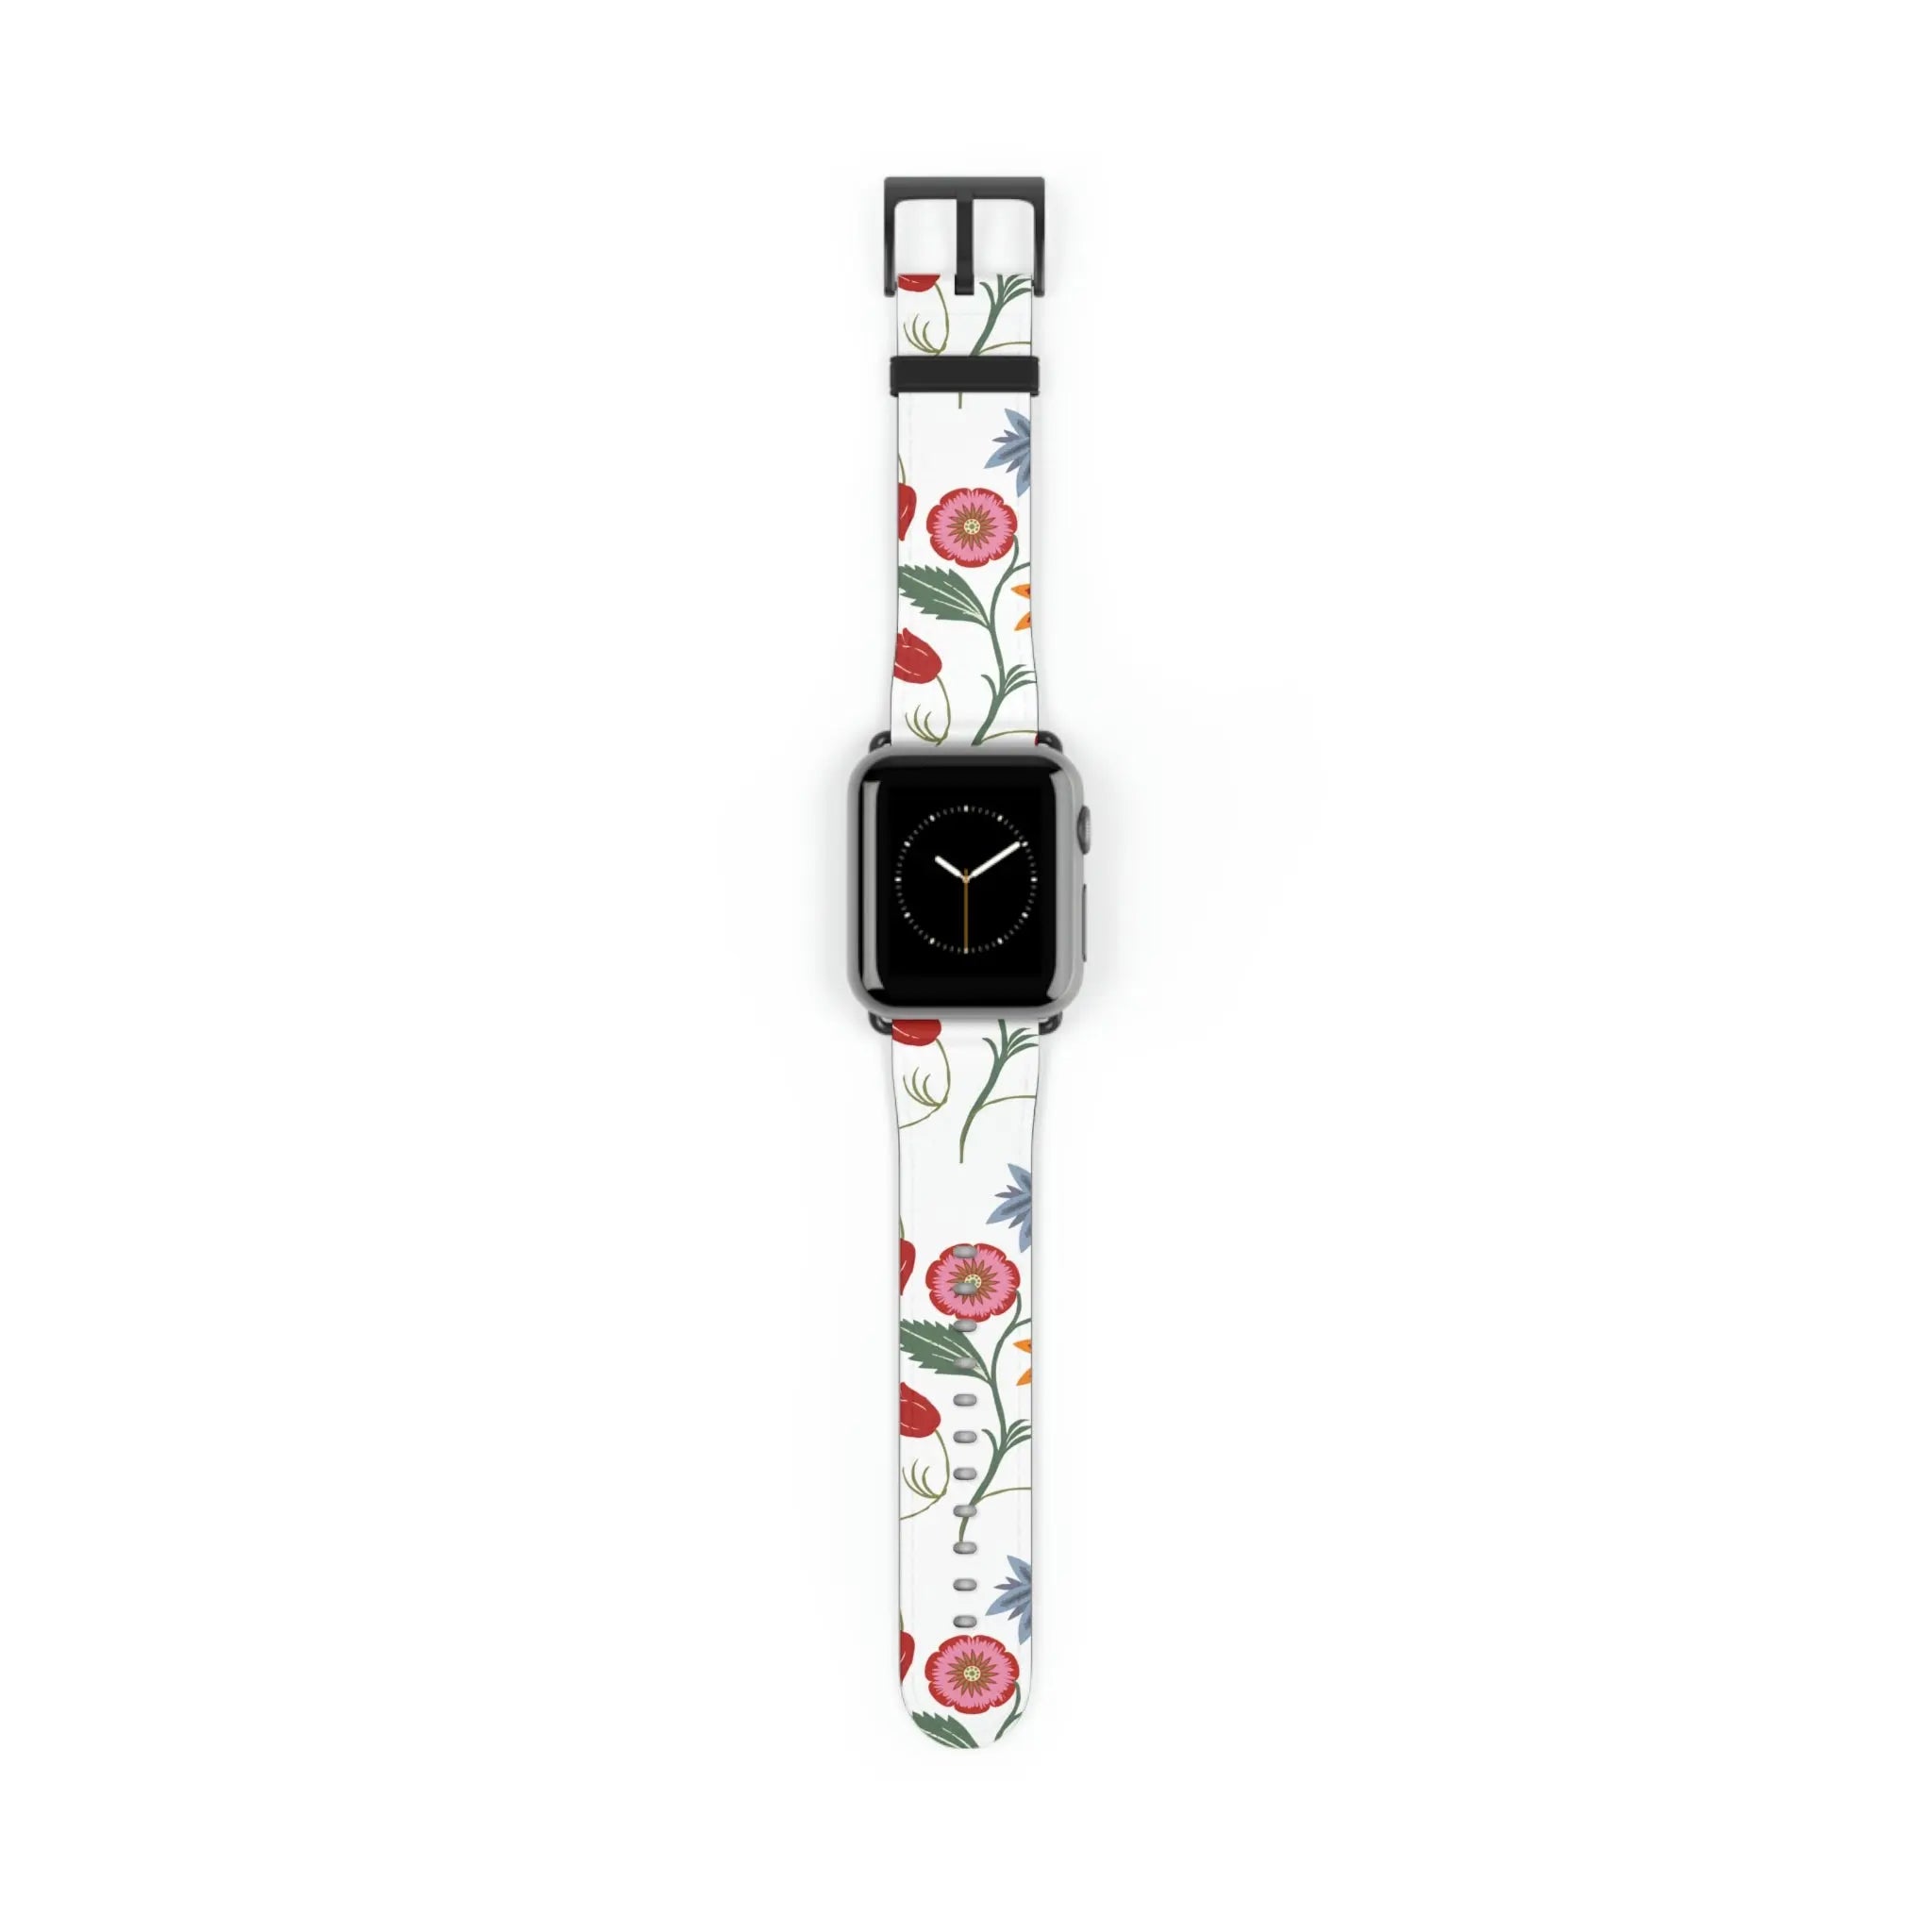  Just Bloom (Wild Flowers) Watch Band for Apple Watch Watch Bands38-41mmBlackMatte